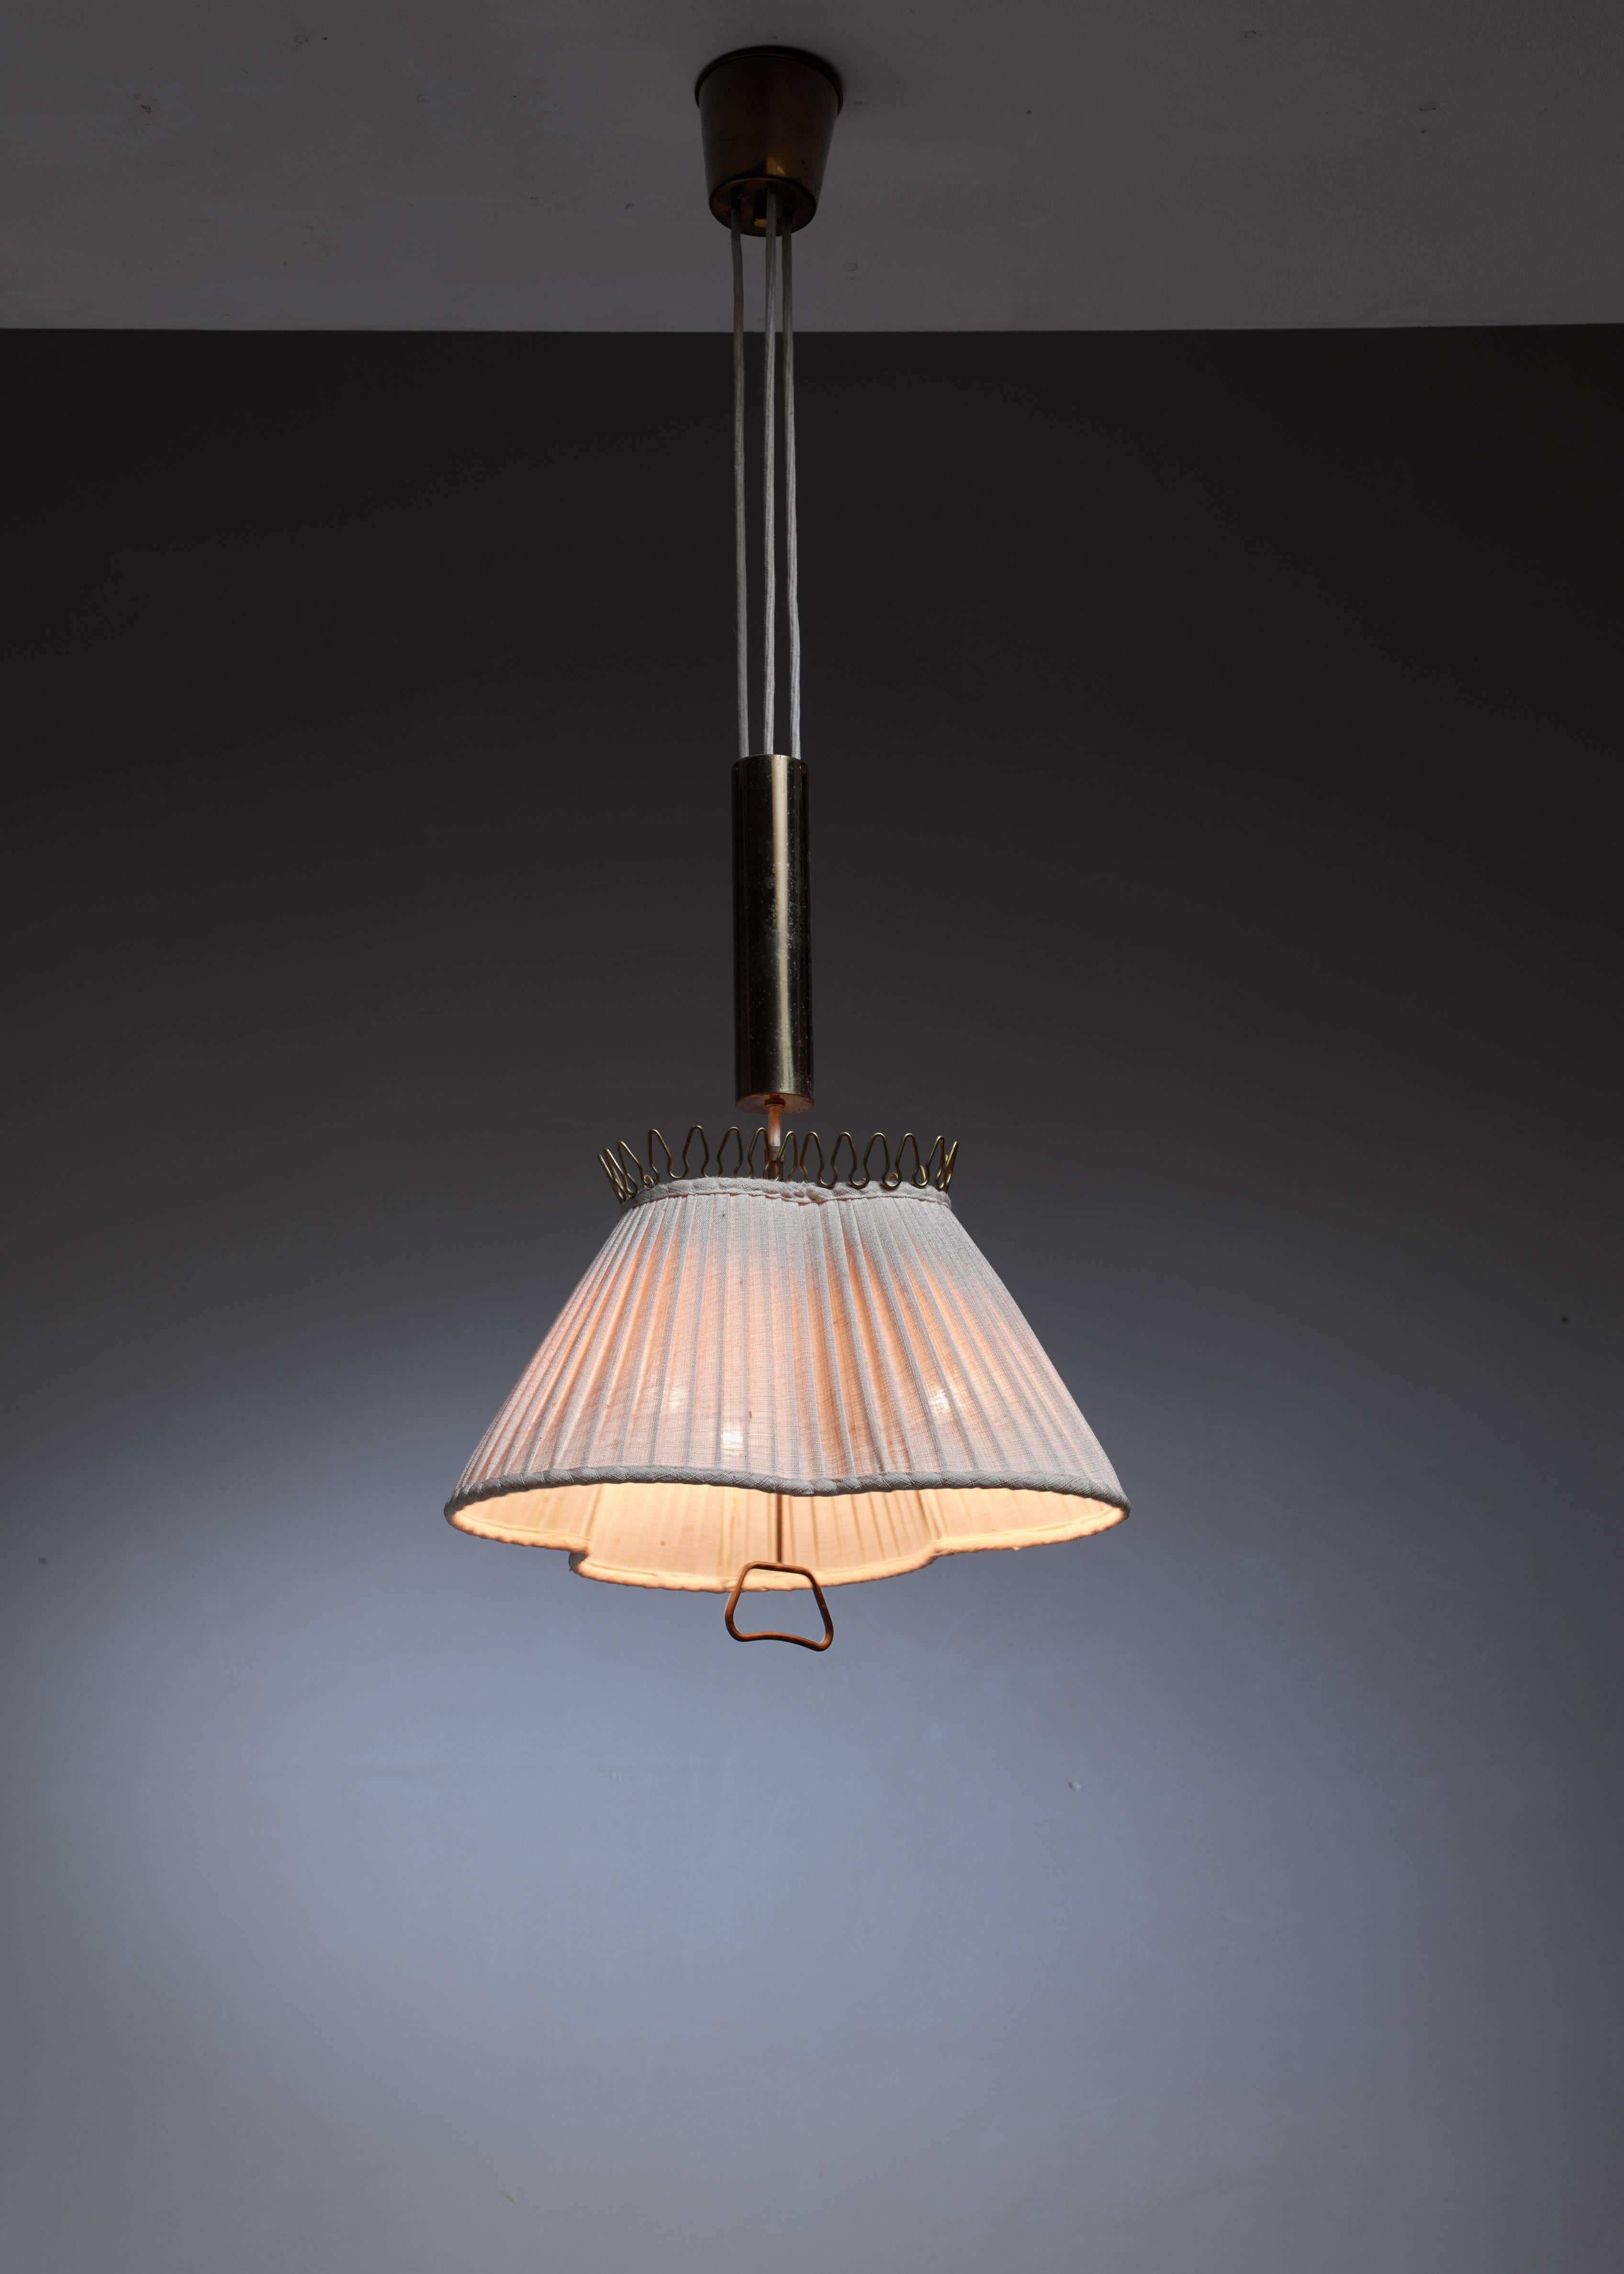 A 1940s pendant lamp from Sweden. The pleated fabric shade has a remarkable trefoil shape with a brass crown-like decoration op top and a subtle brass pull. The height of the lamp is adjustable (between circa 100 and 180 cm) with the beautiful